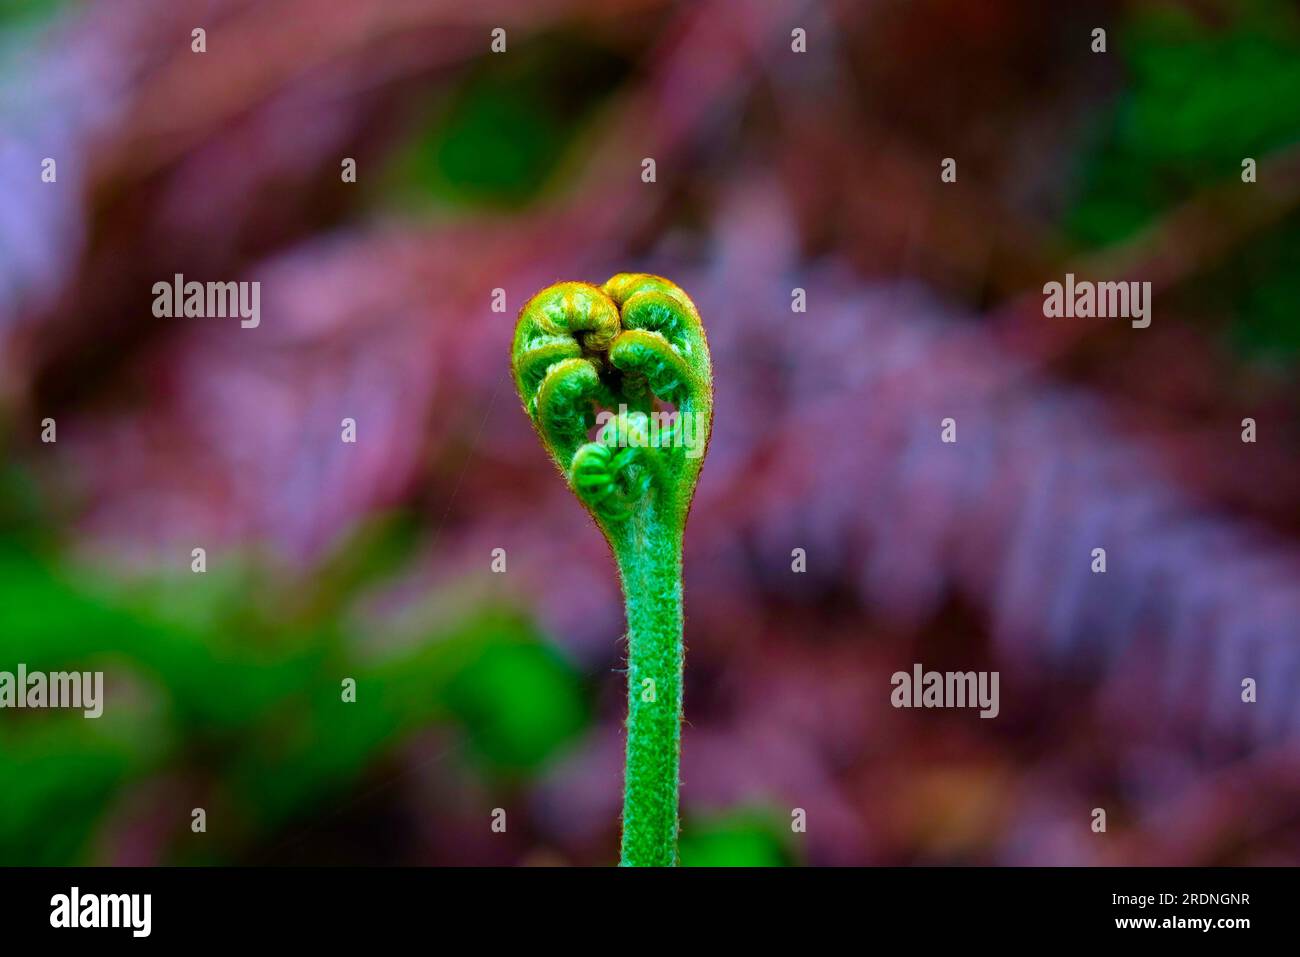 Single isolated fern frond with a a blurred floral background. Stock Photo